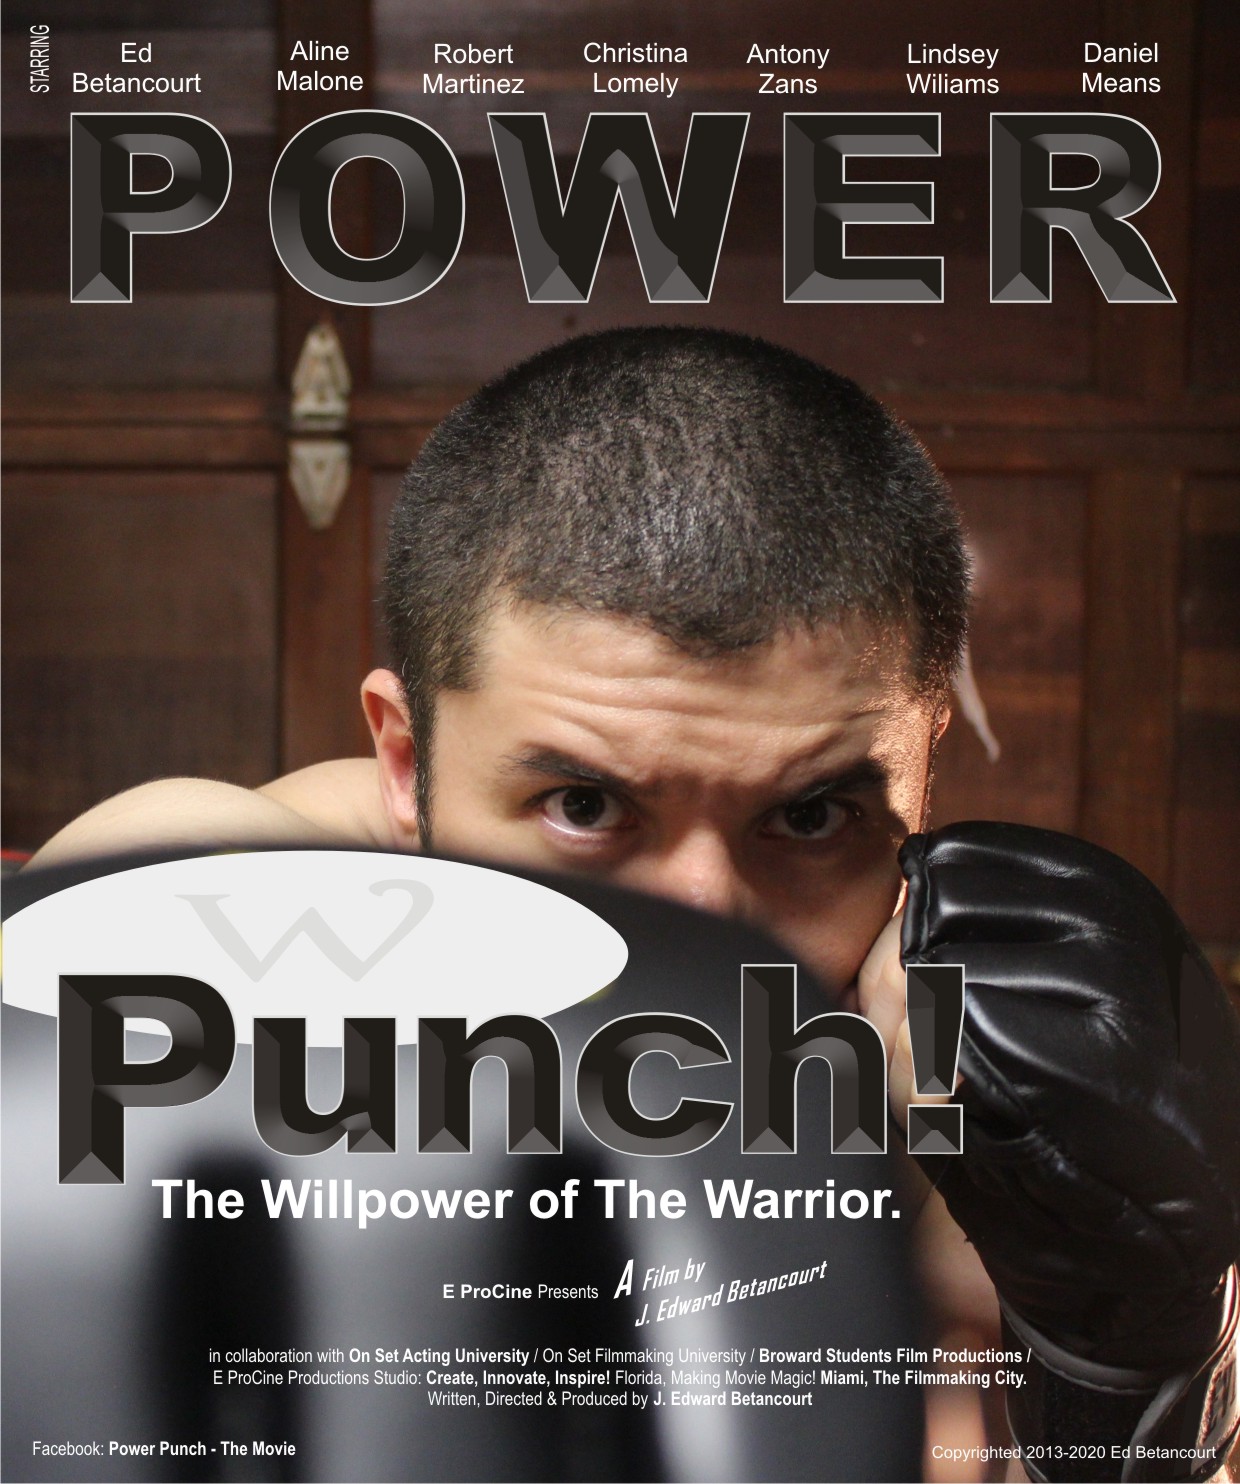 POWER PUNCH - THE WILLPOWER OF THE WARRIOR